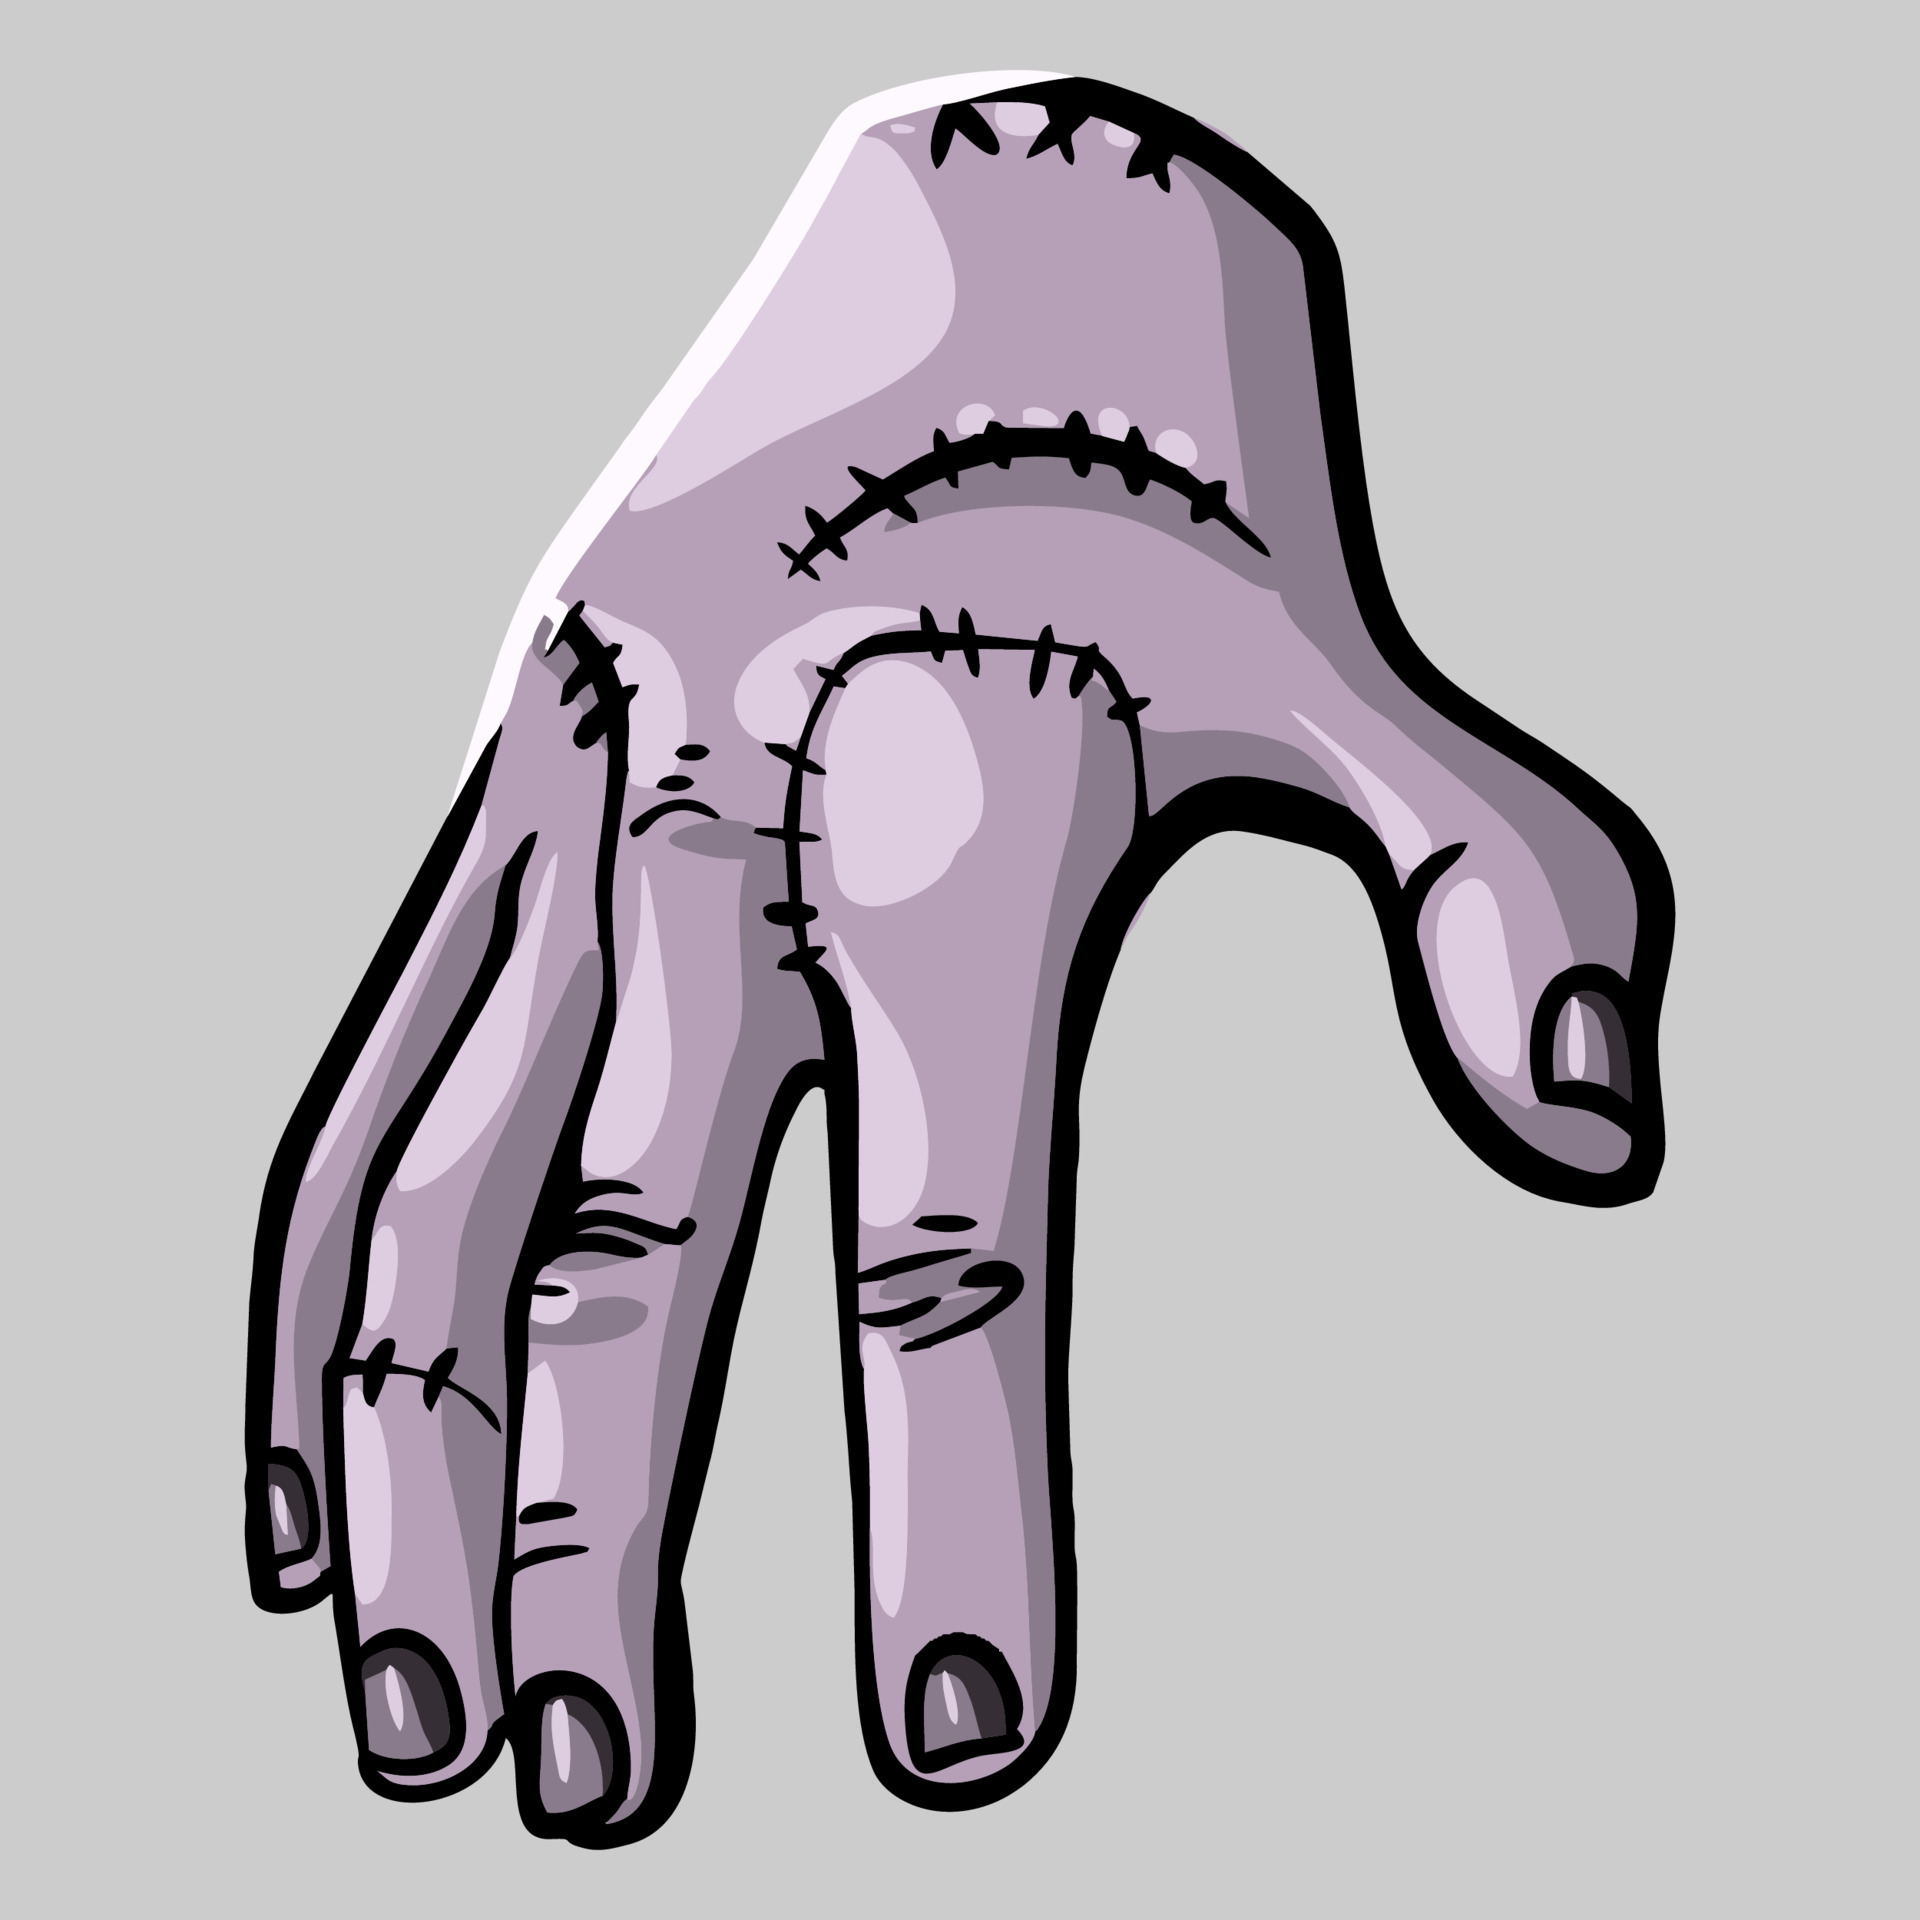 disembodied hand called the Thing. Wednesday. Happy Halloween